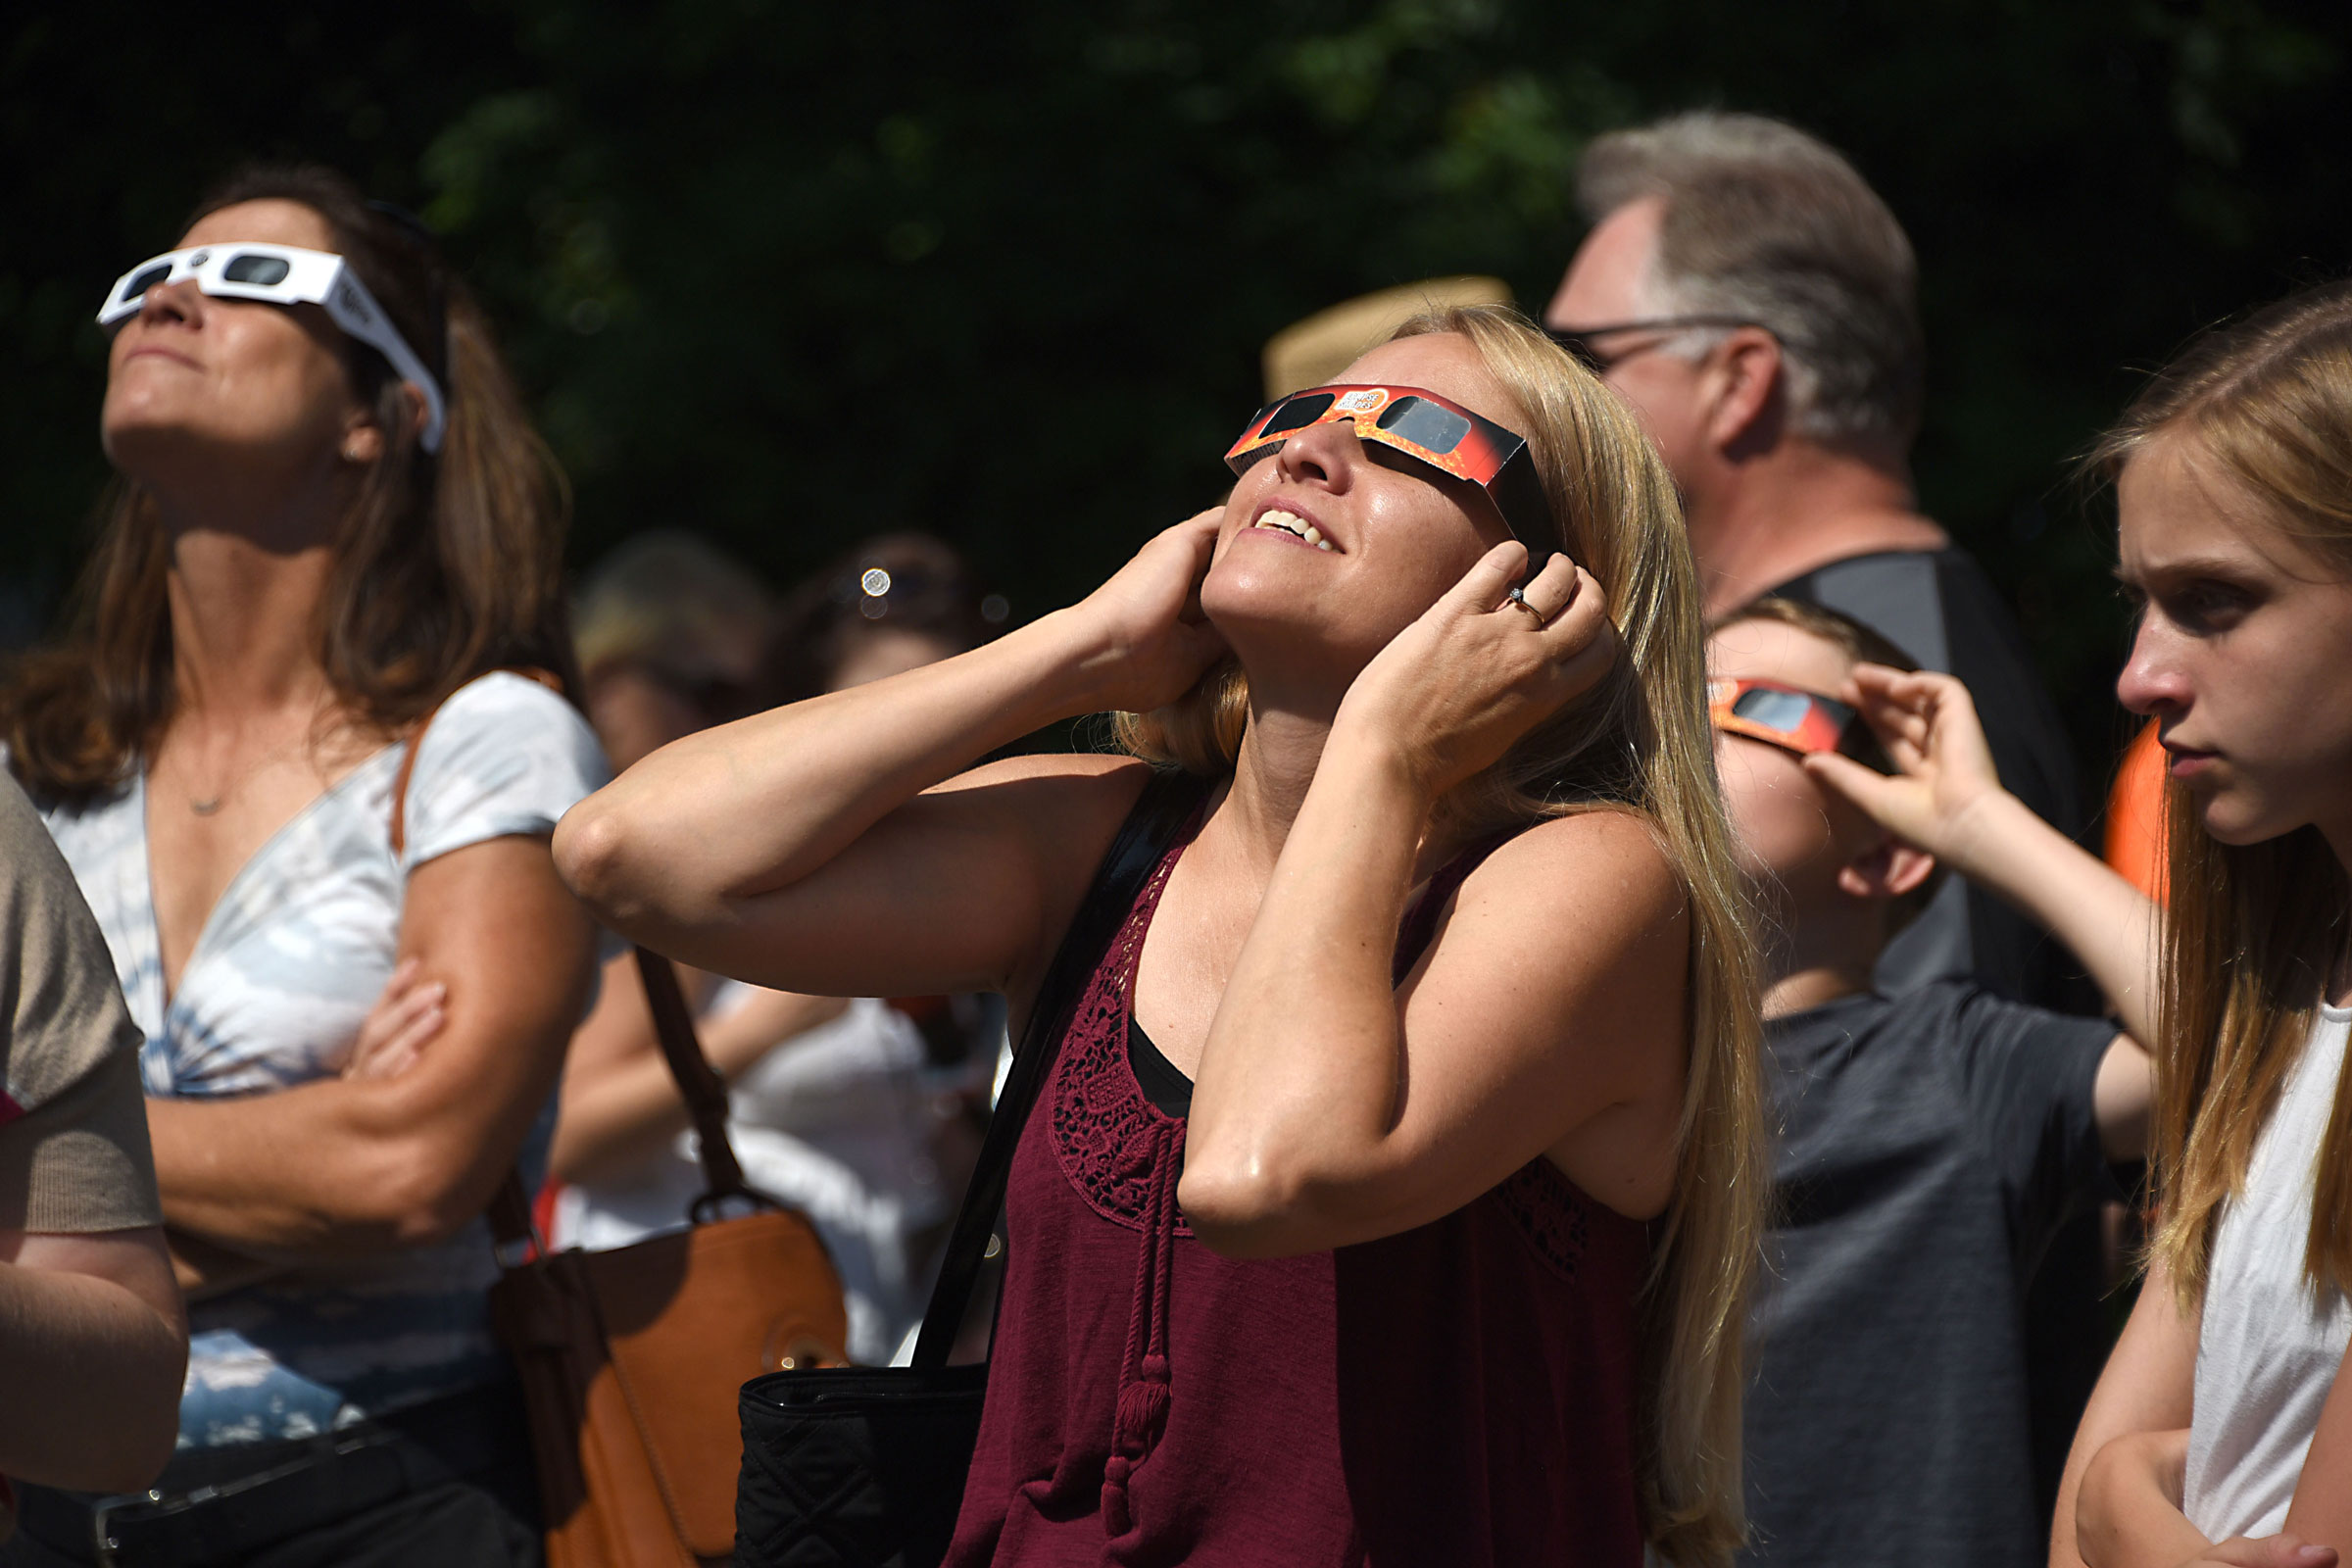 People use special eclipse glasses to watch the solar eclipse, on Aug. 21, 2017 in Schenectady, N.Y.